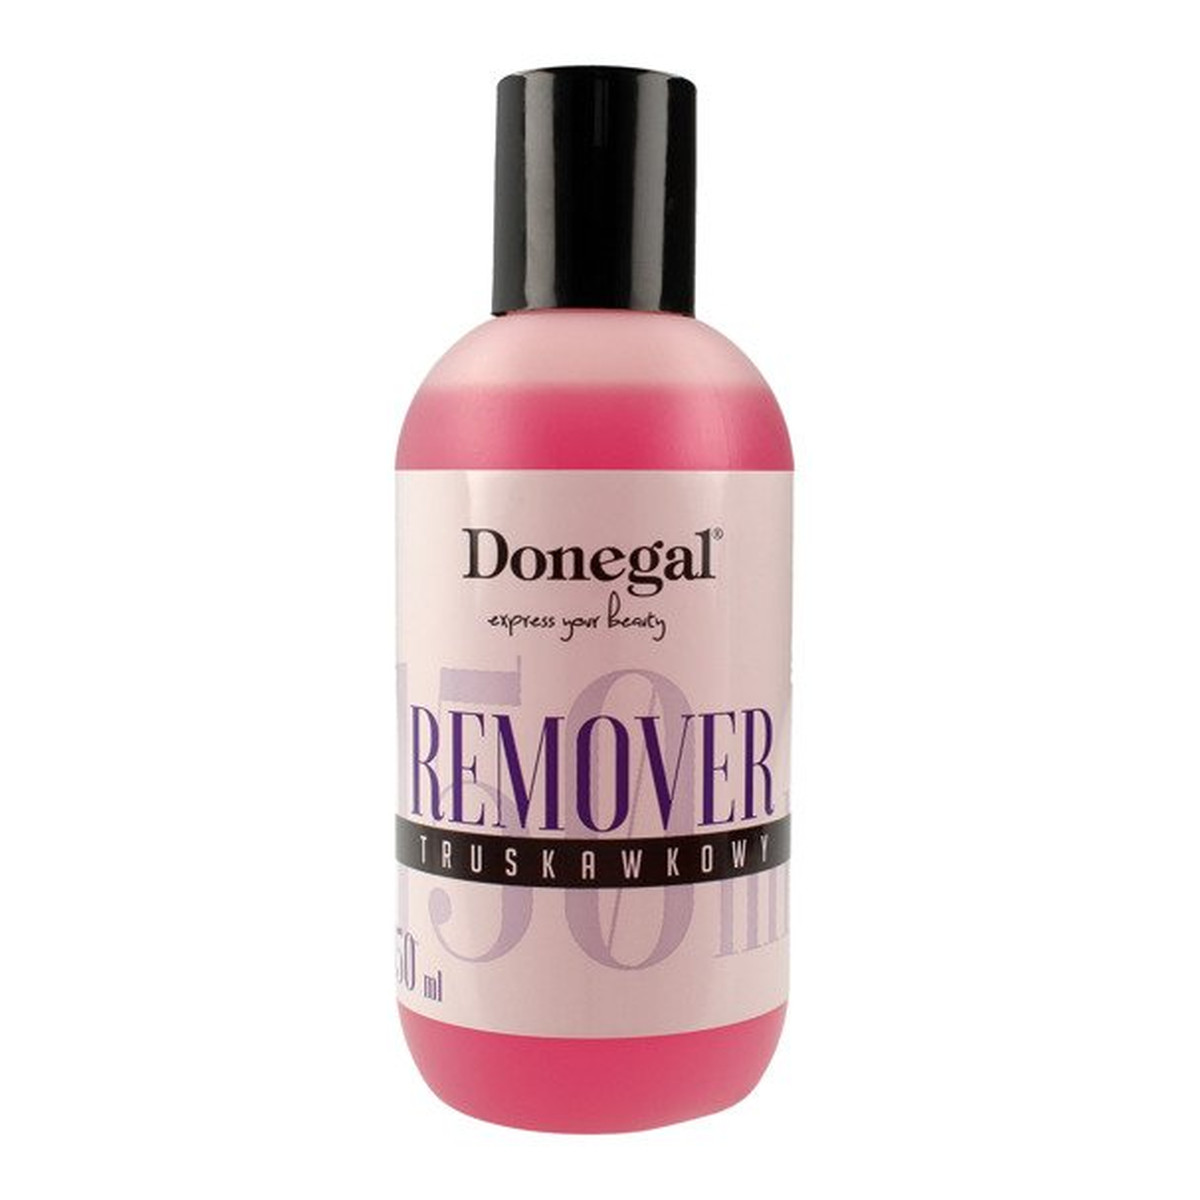 Donegal REMOVER truskawkowy (2486) 150ml